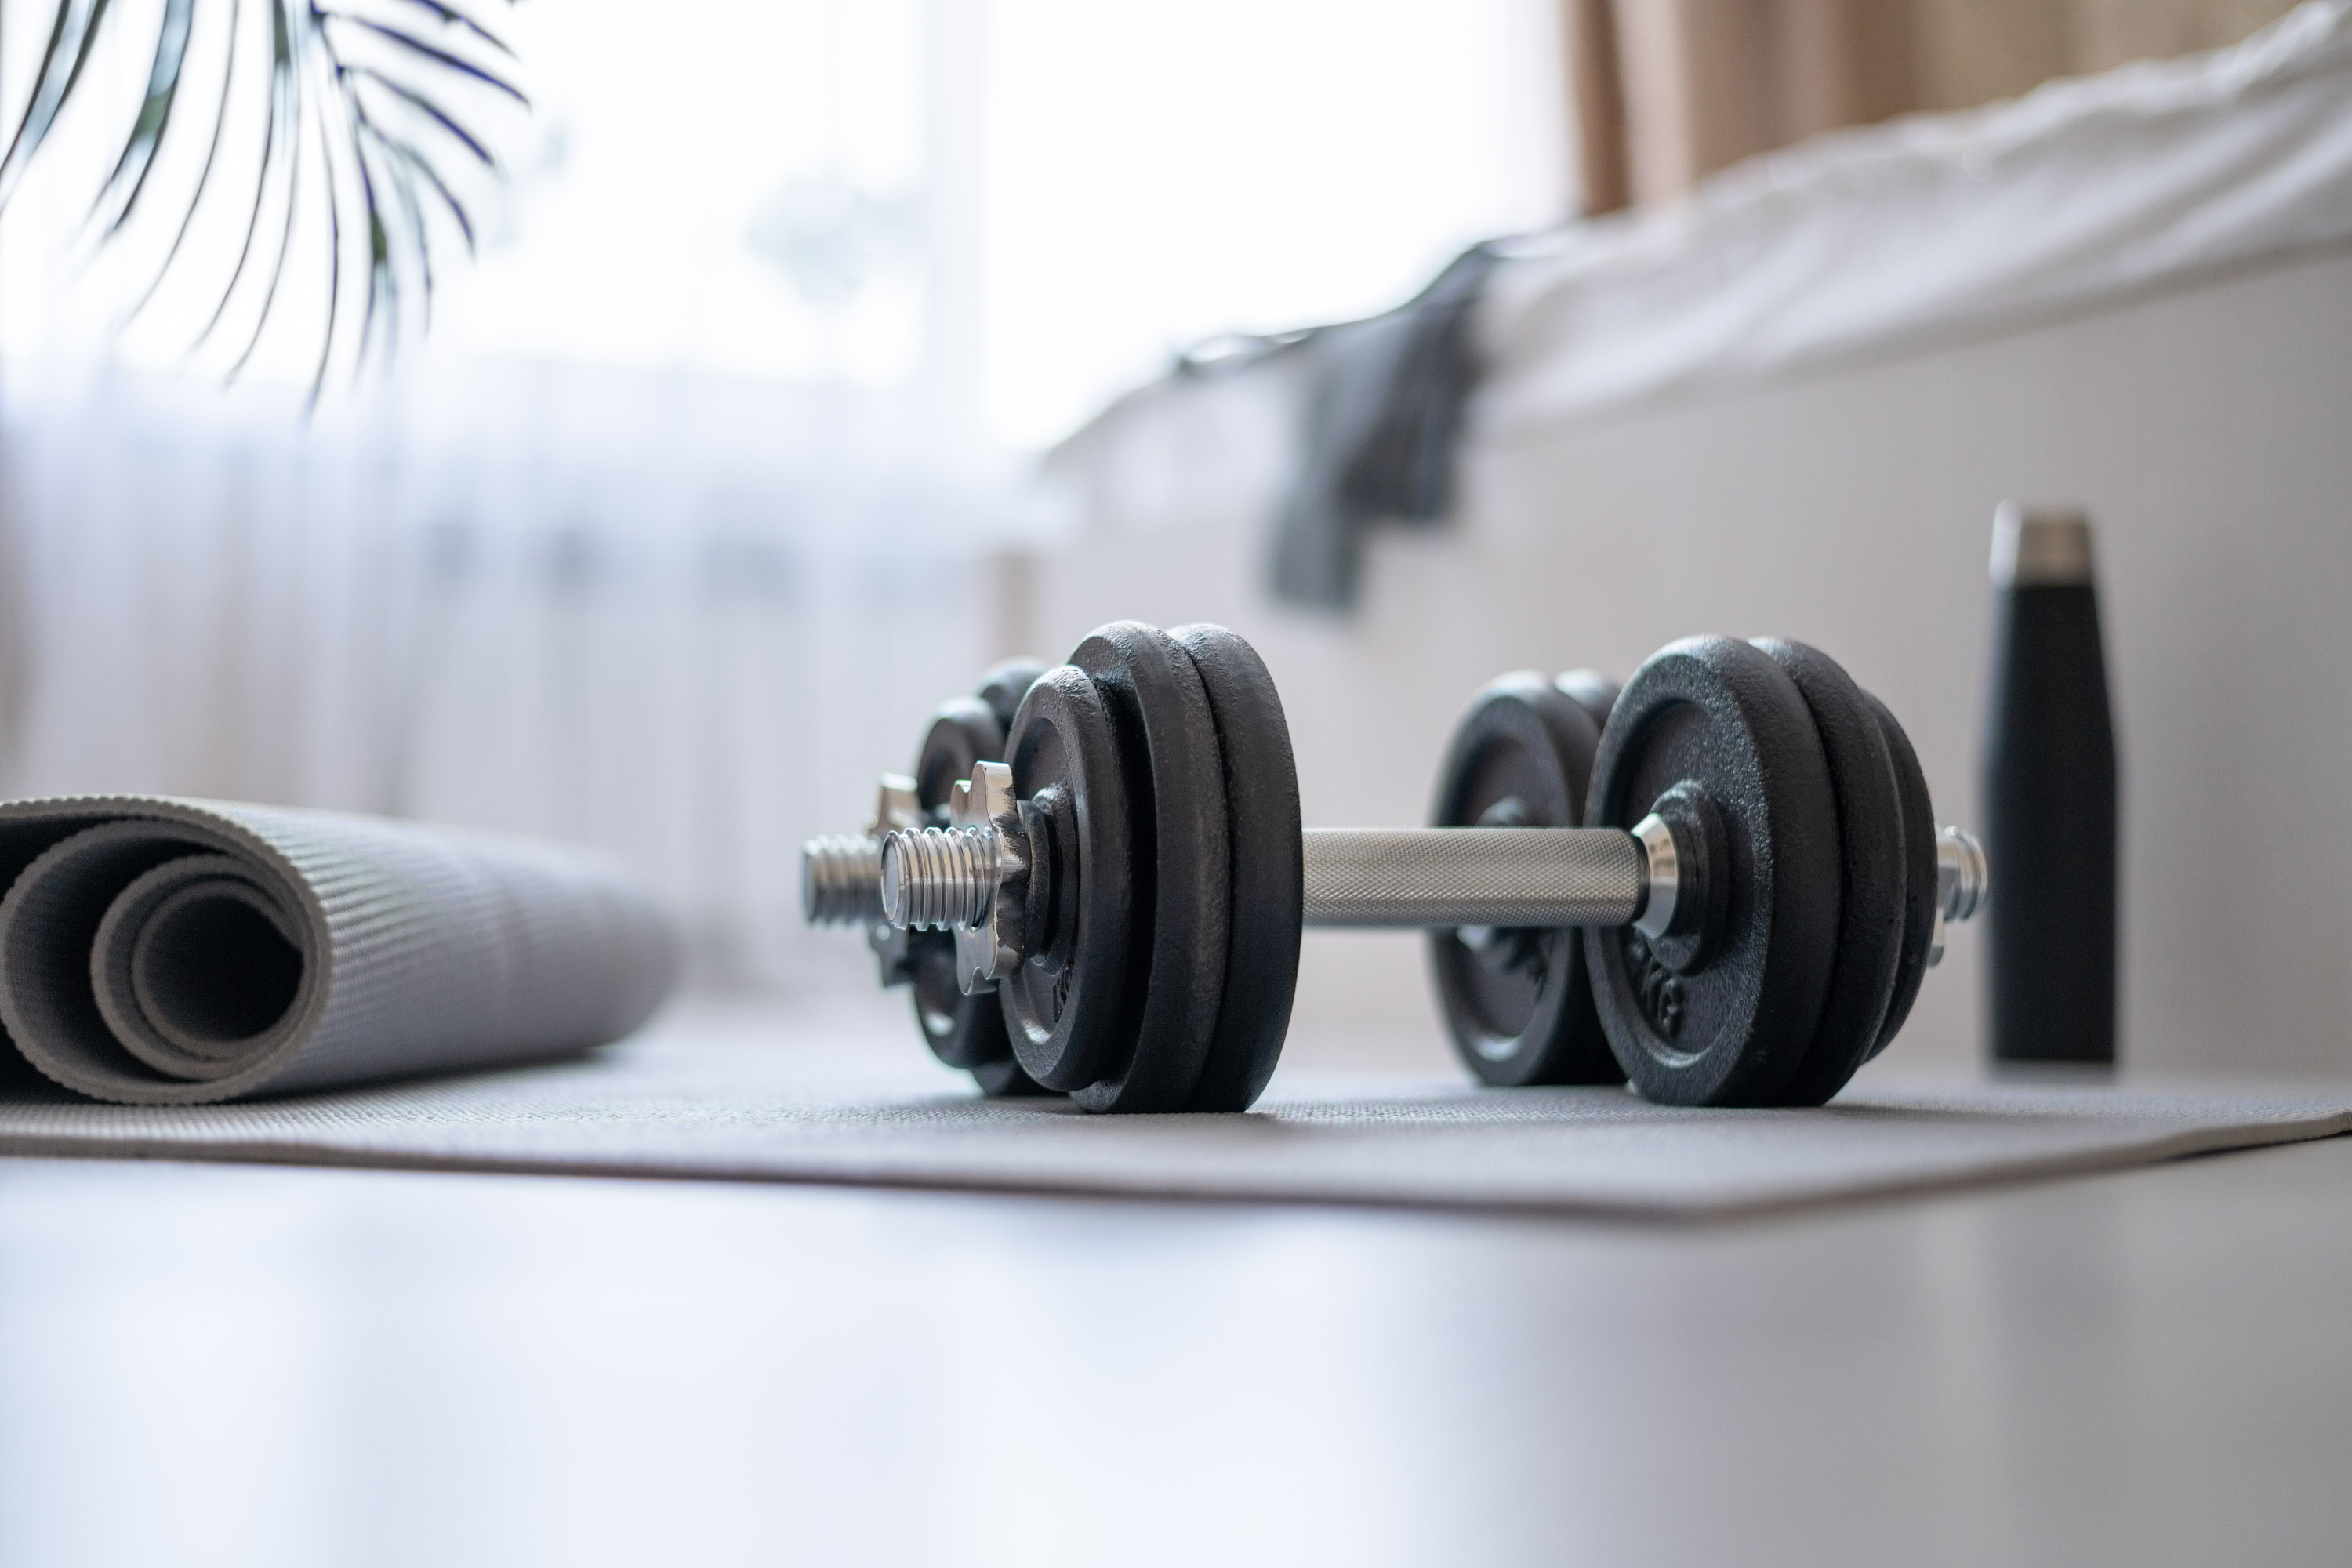 Dumbbells, mat, water, on the floor in the bedroom preparing for home sports